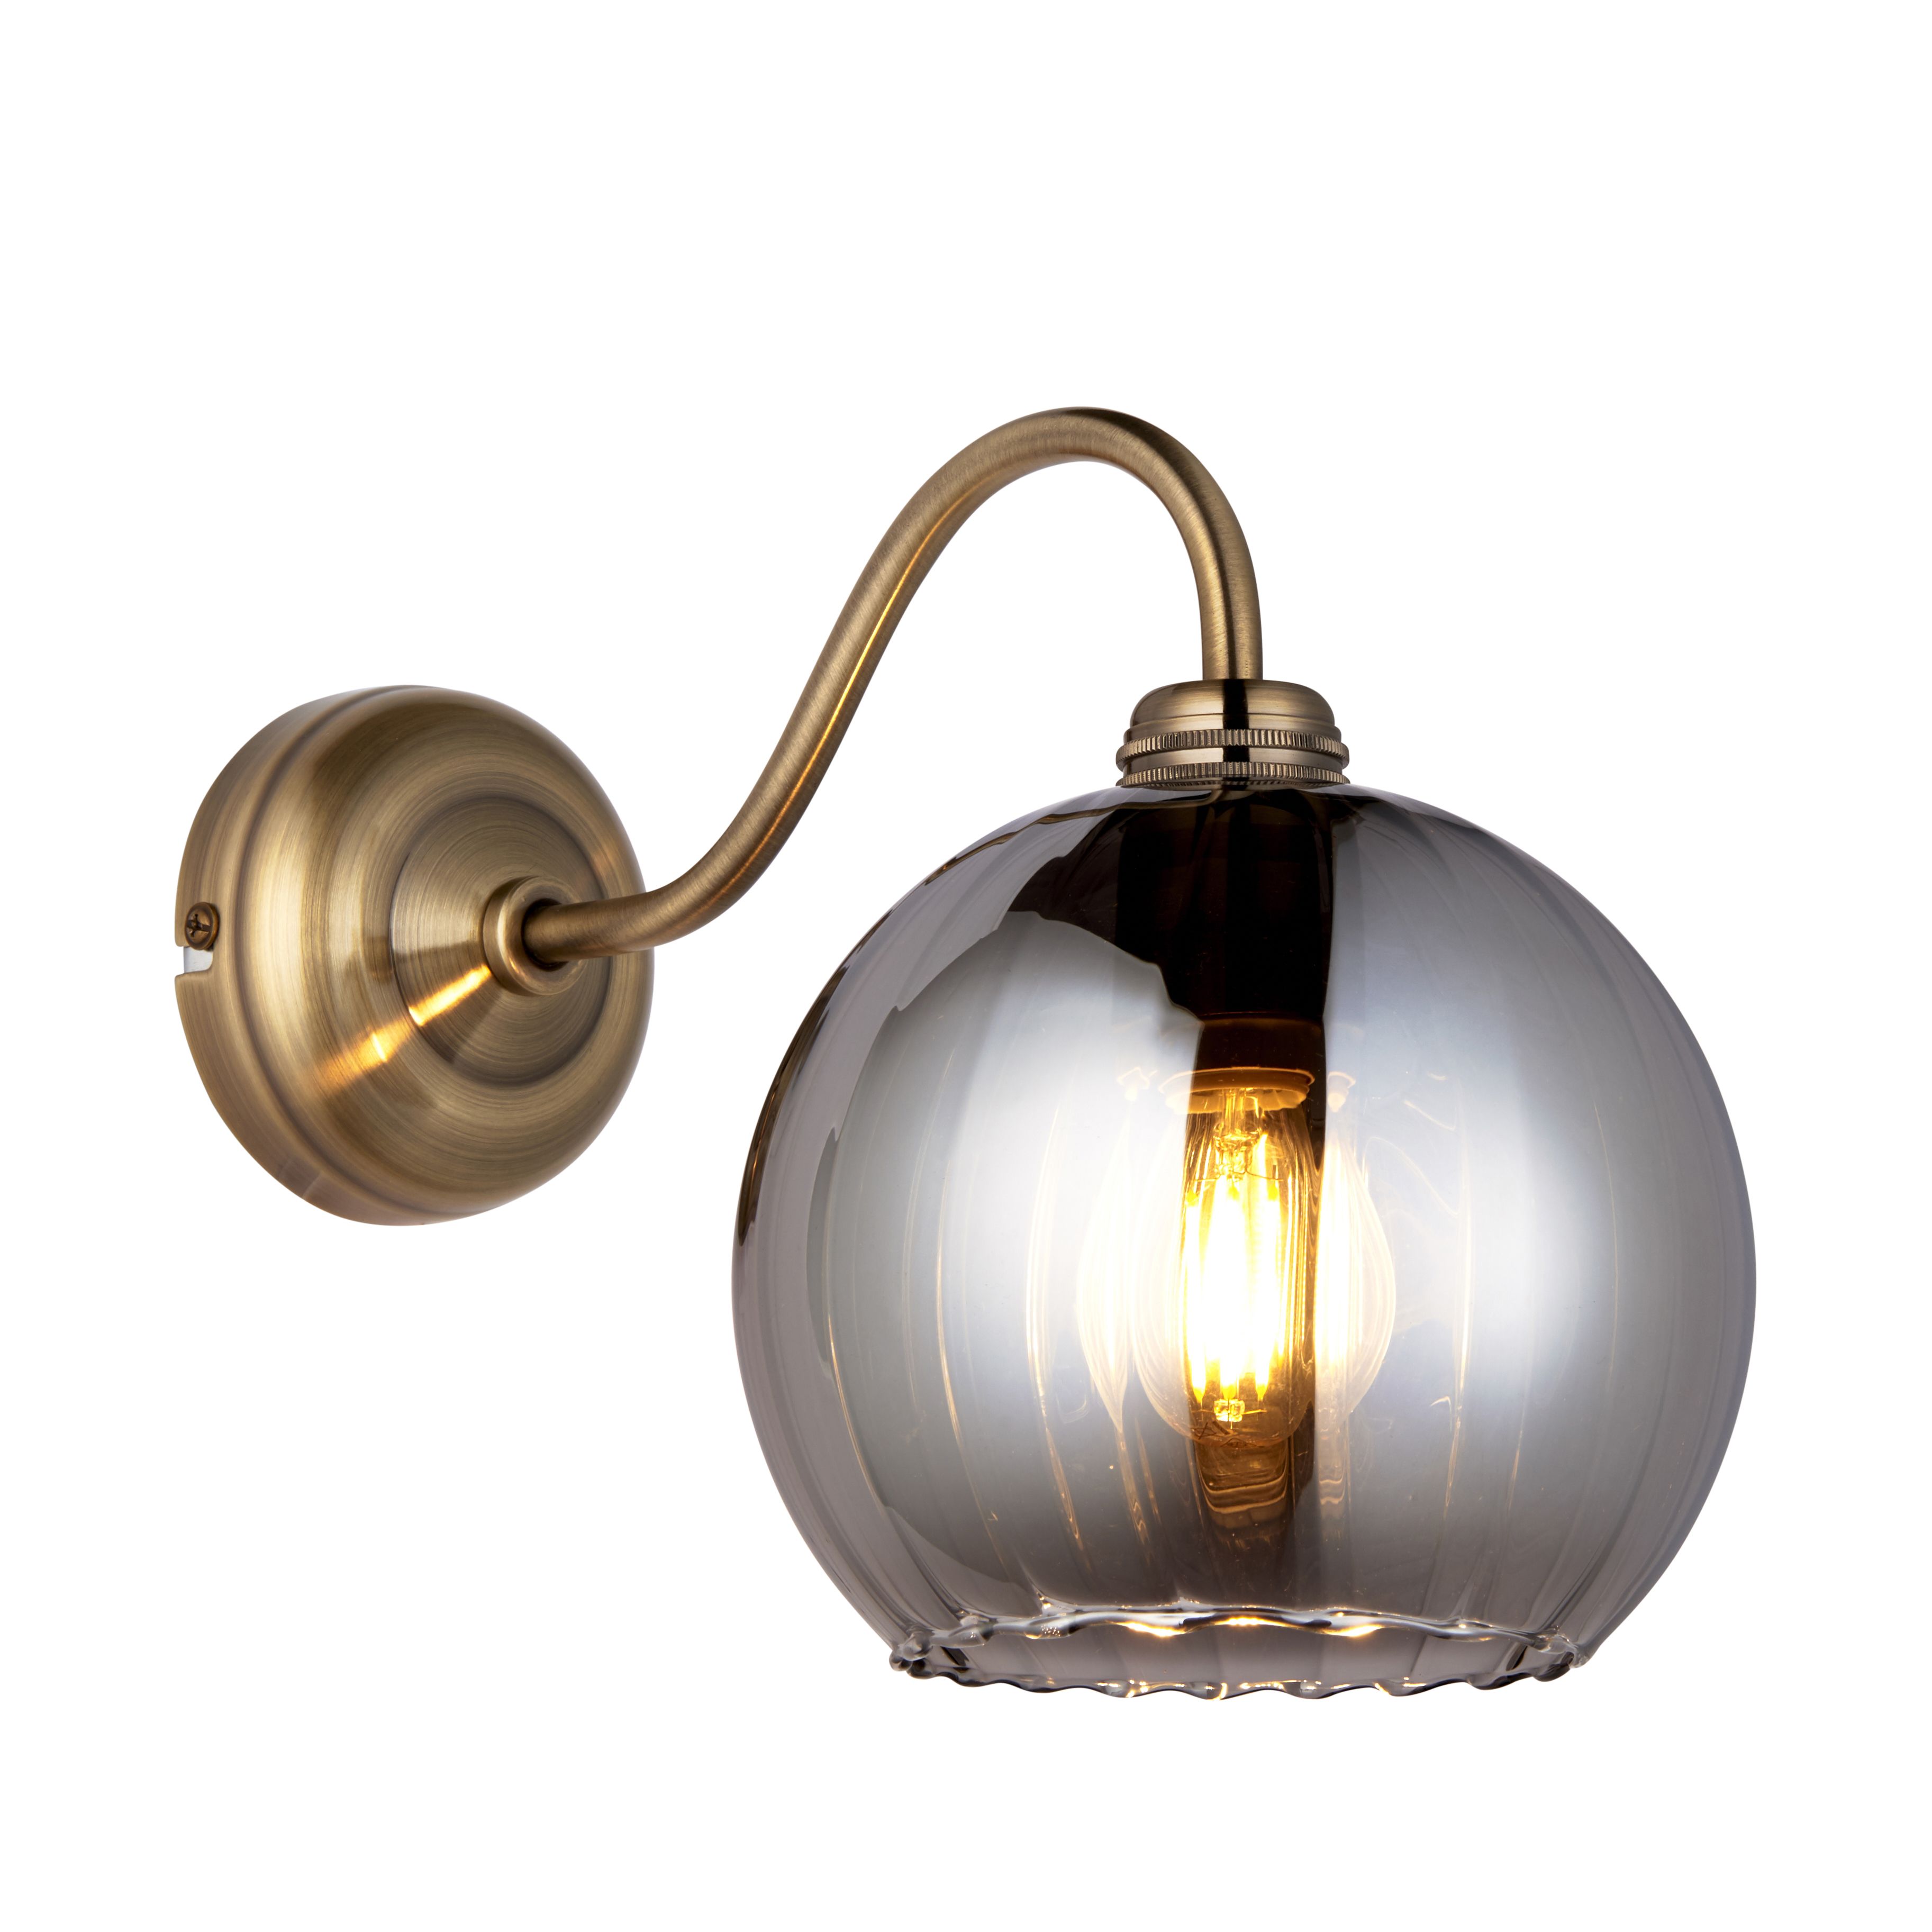 Priva Ribbed Bronze Antique brass effect Wired LED Wall light